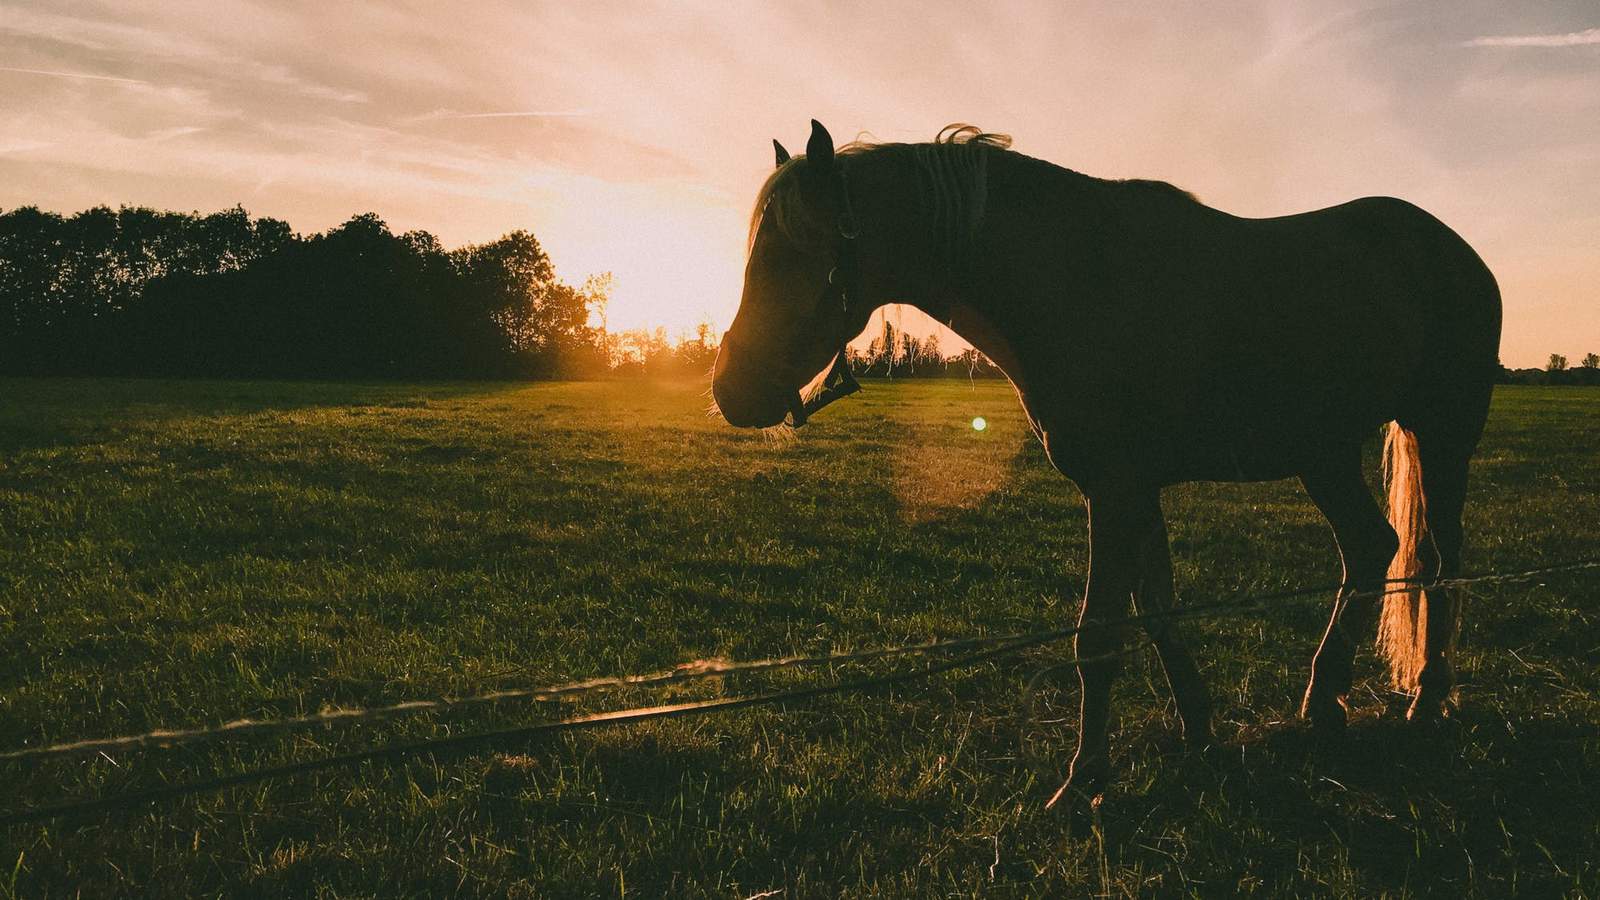 'No cause for alarm’: Horse euthanized in Blacksburg after developing contagious disease